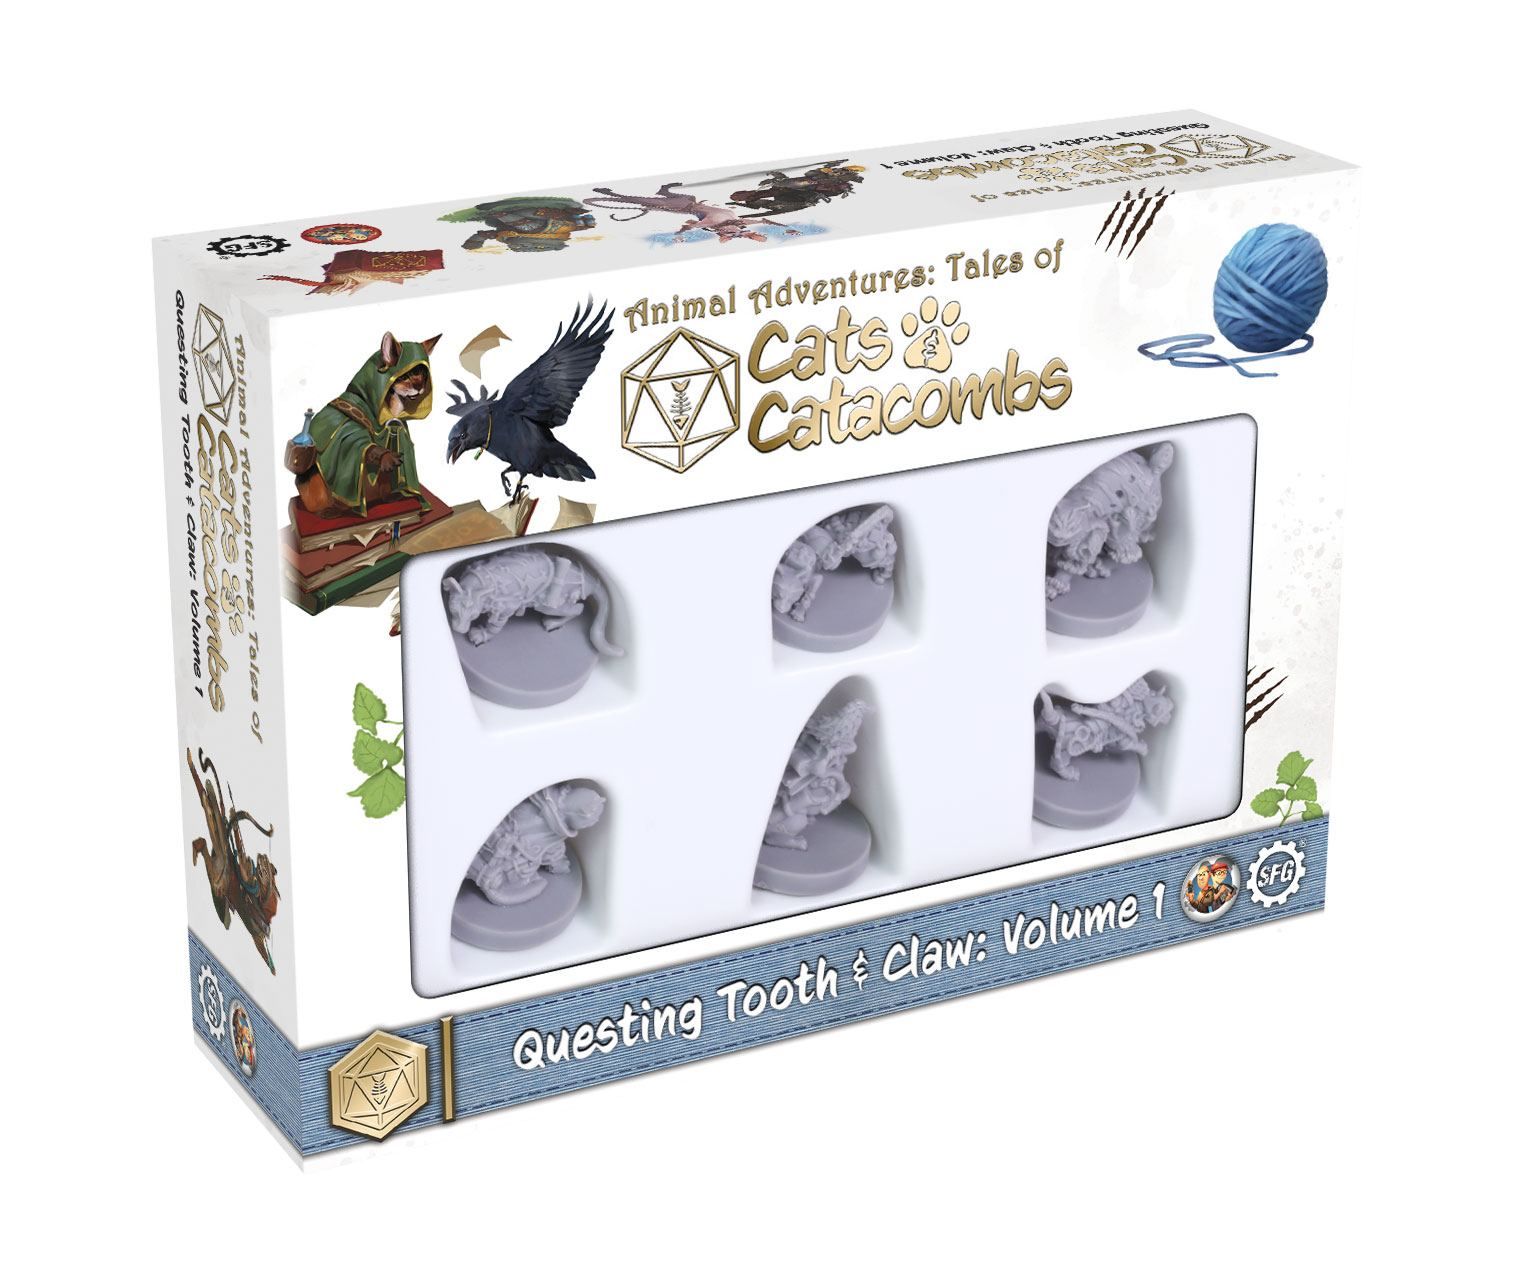 Animal Adventures Cats & Catacombs: Questing Tooth & Claw Miniatures 6-pack Volume 1 english Steamforged Games